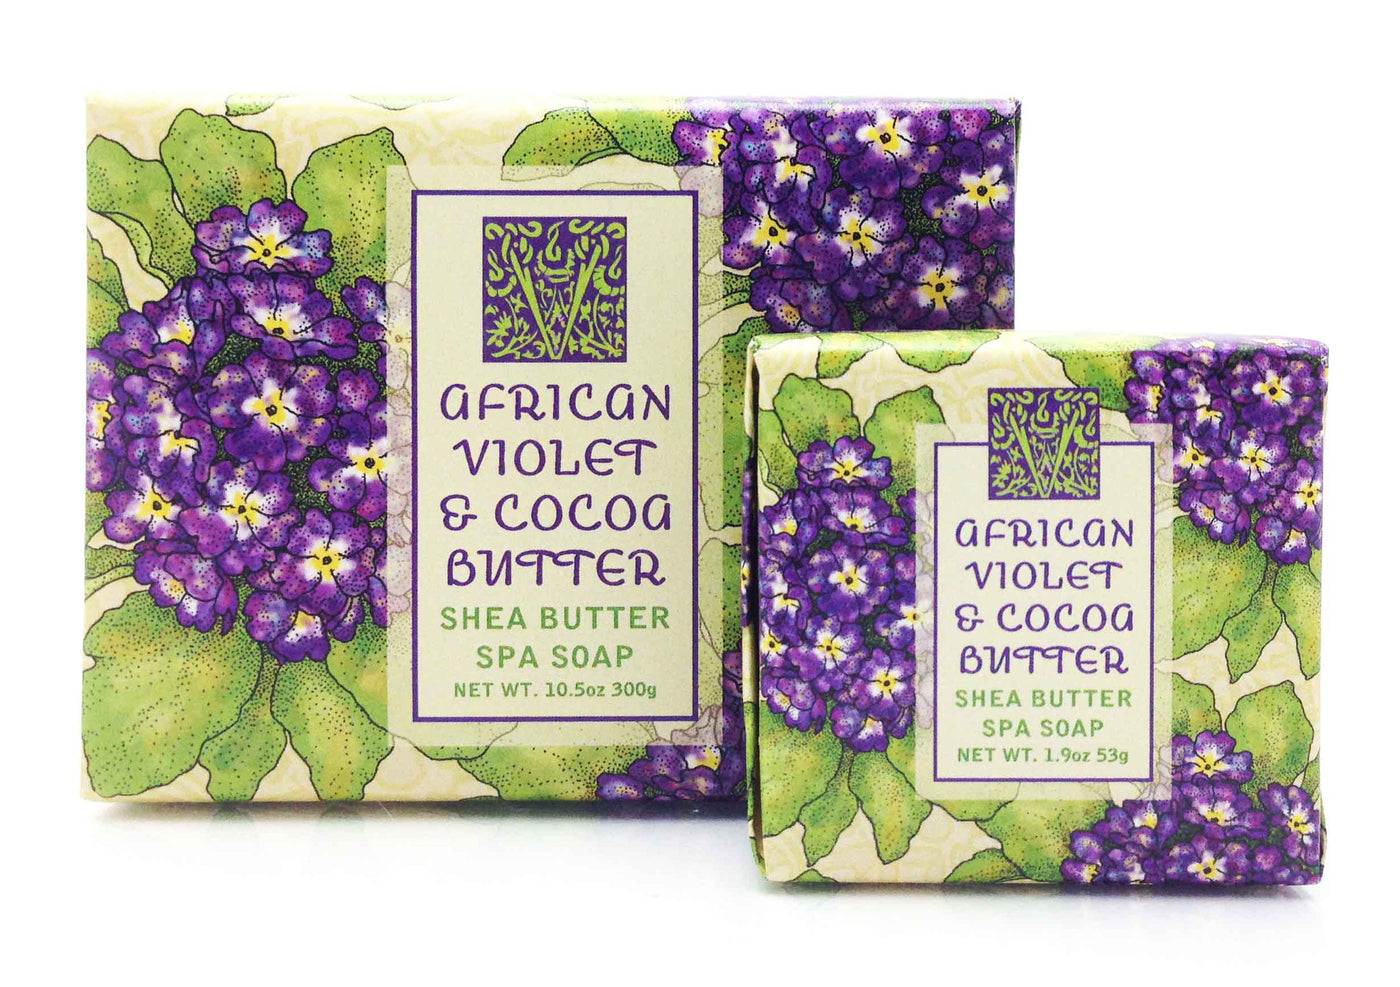 African Violet & Cocoa Butter Soap by Greenwich Bay Trading Co